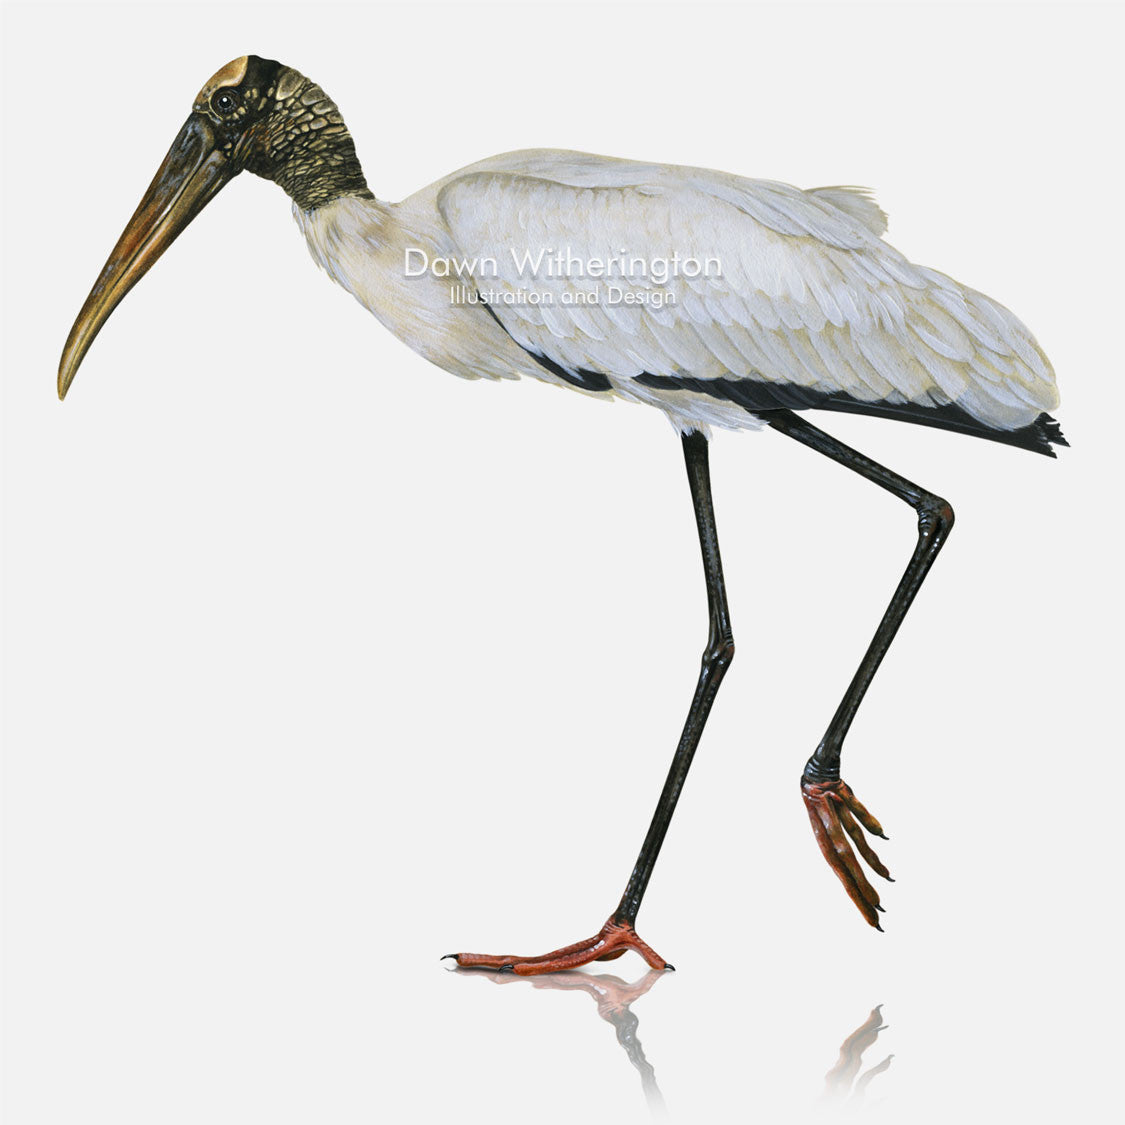 This beautiful illustration of a wood stork, Mycteria americana, is biologically accurate in detail.